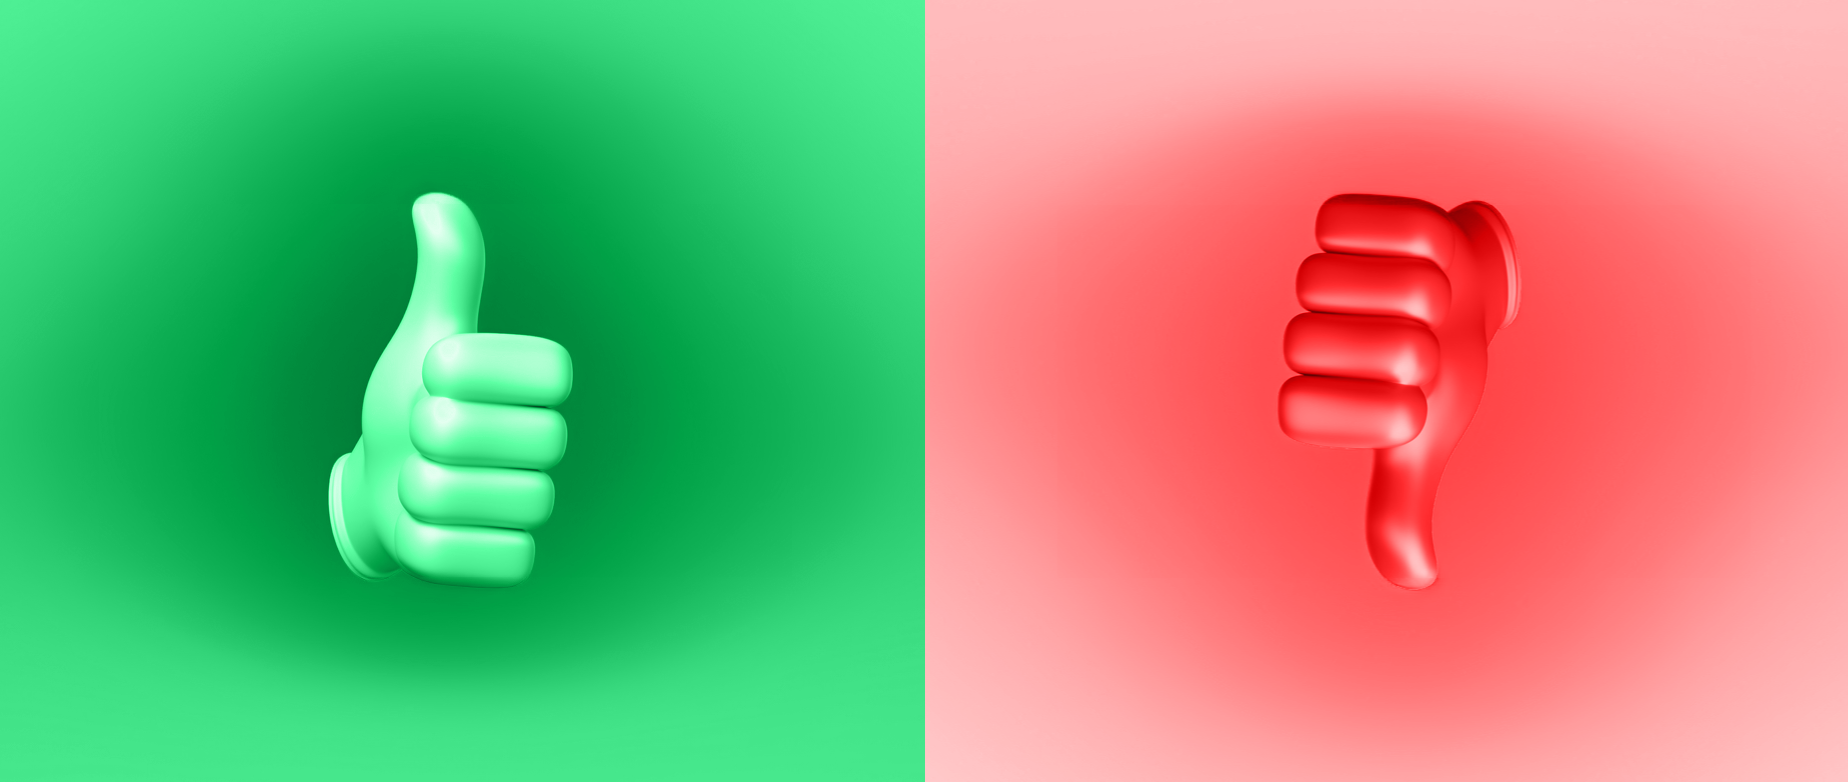 a split screen in which the left half is a green thumbs up sign, and the right side is a red thumbs down sign: crowdfunding advantages and disadvantages